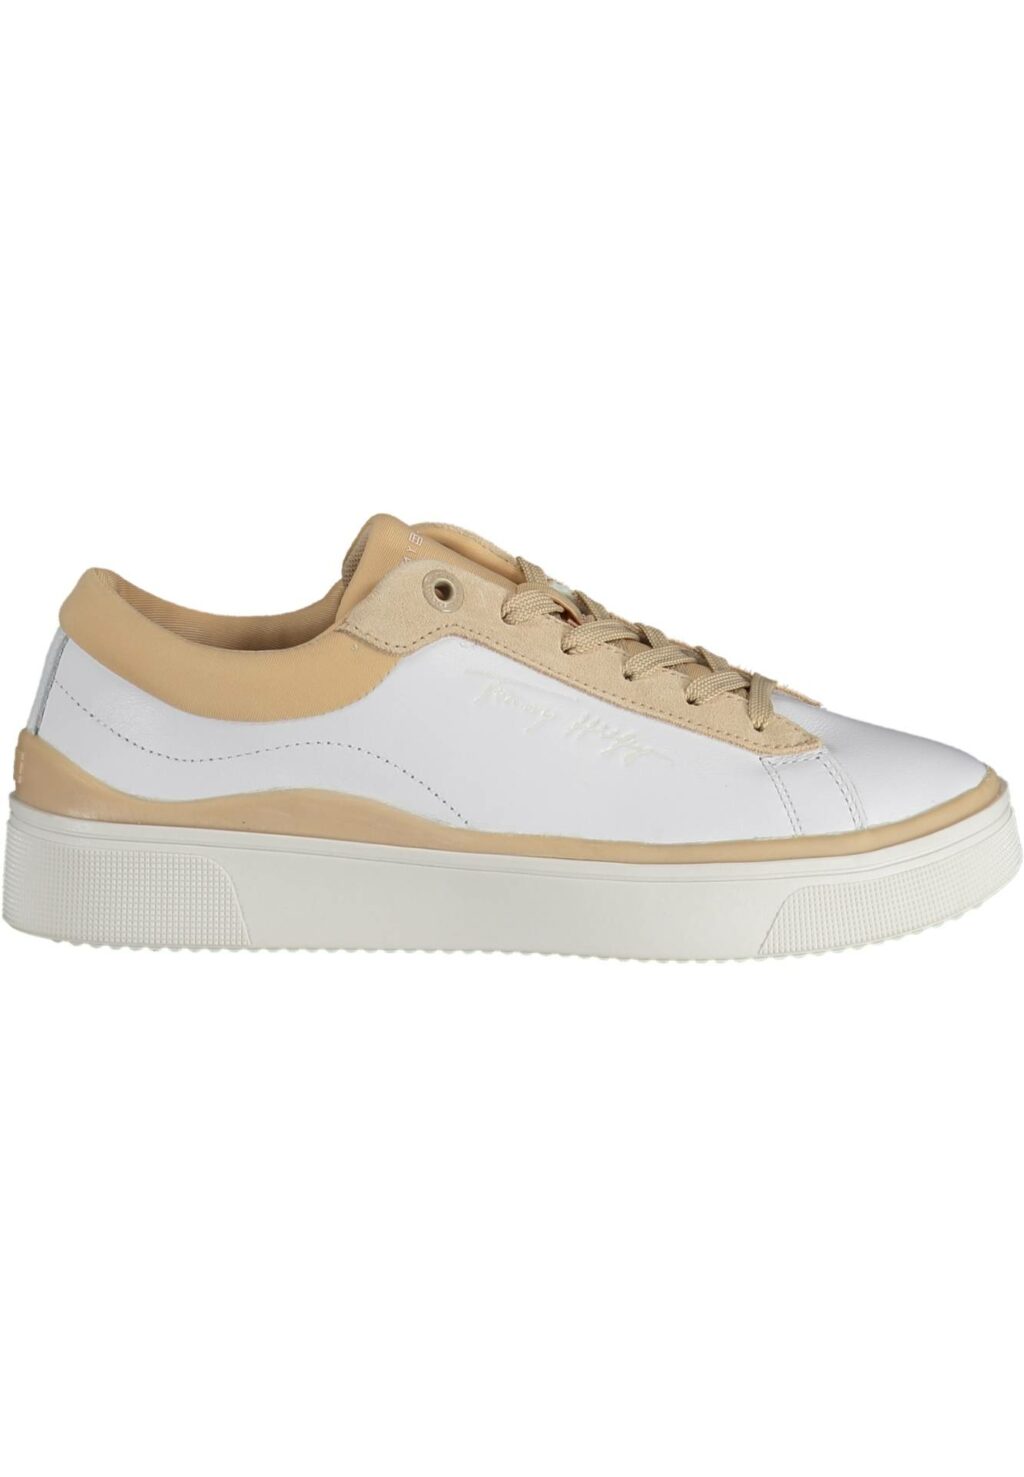 TOMMY HILFIGER WHITE WOMEN'S SPORTS SHOES FW0FW06317F_BIANCO_TRY